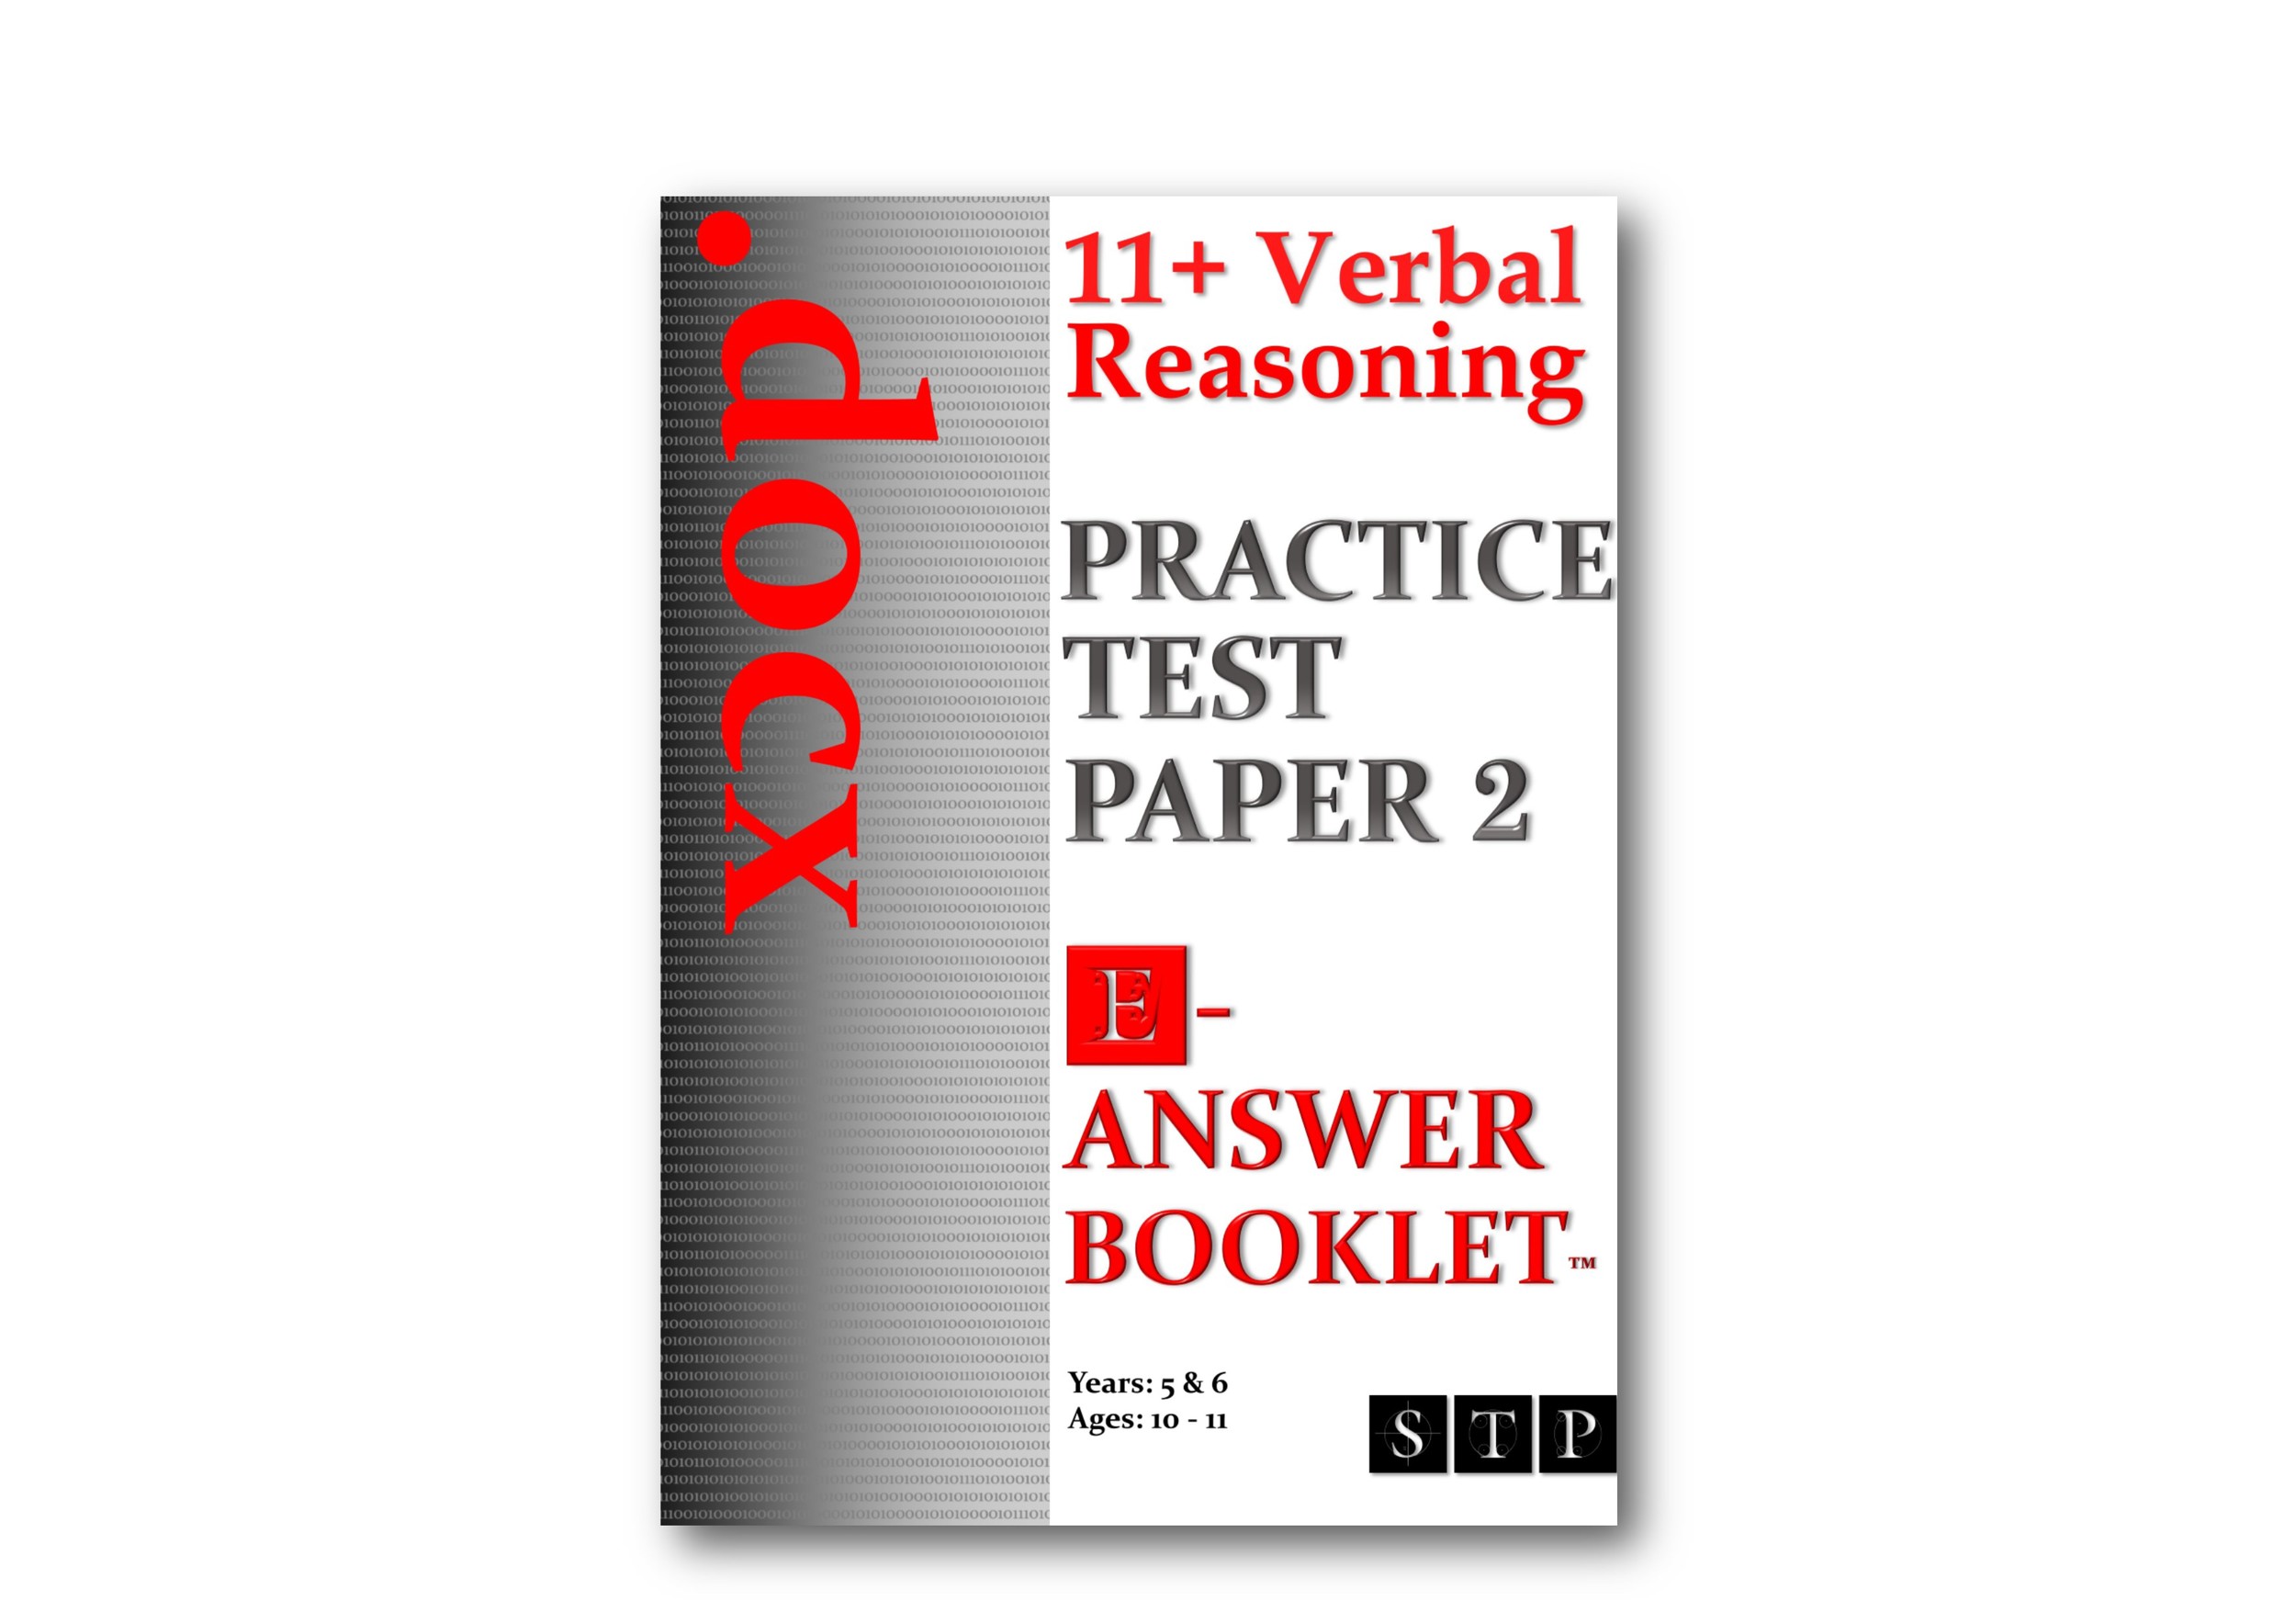 11+ Verbal Reasoning Practice Test Paper 2 (E-Answer Booklet).jpg